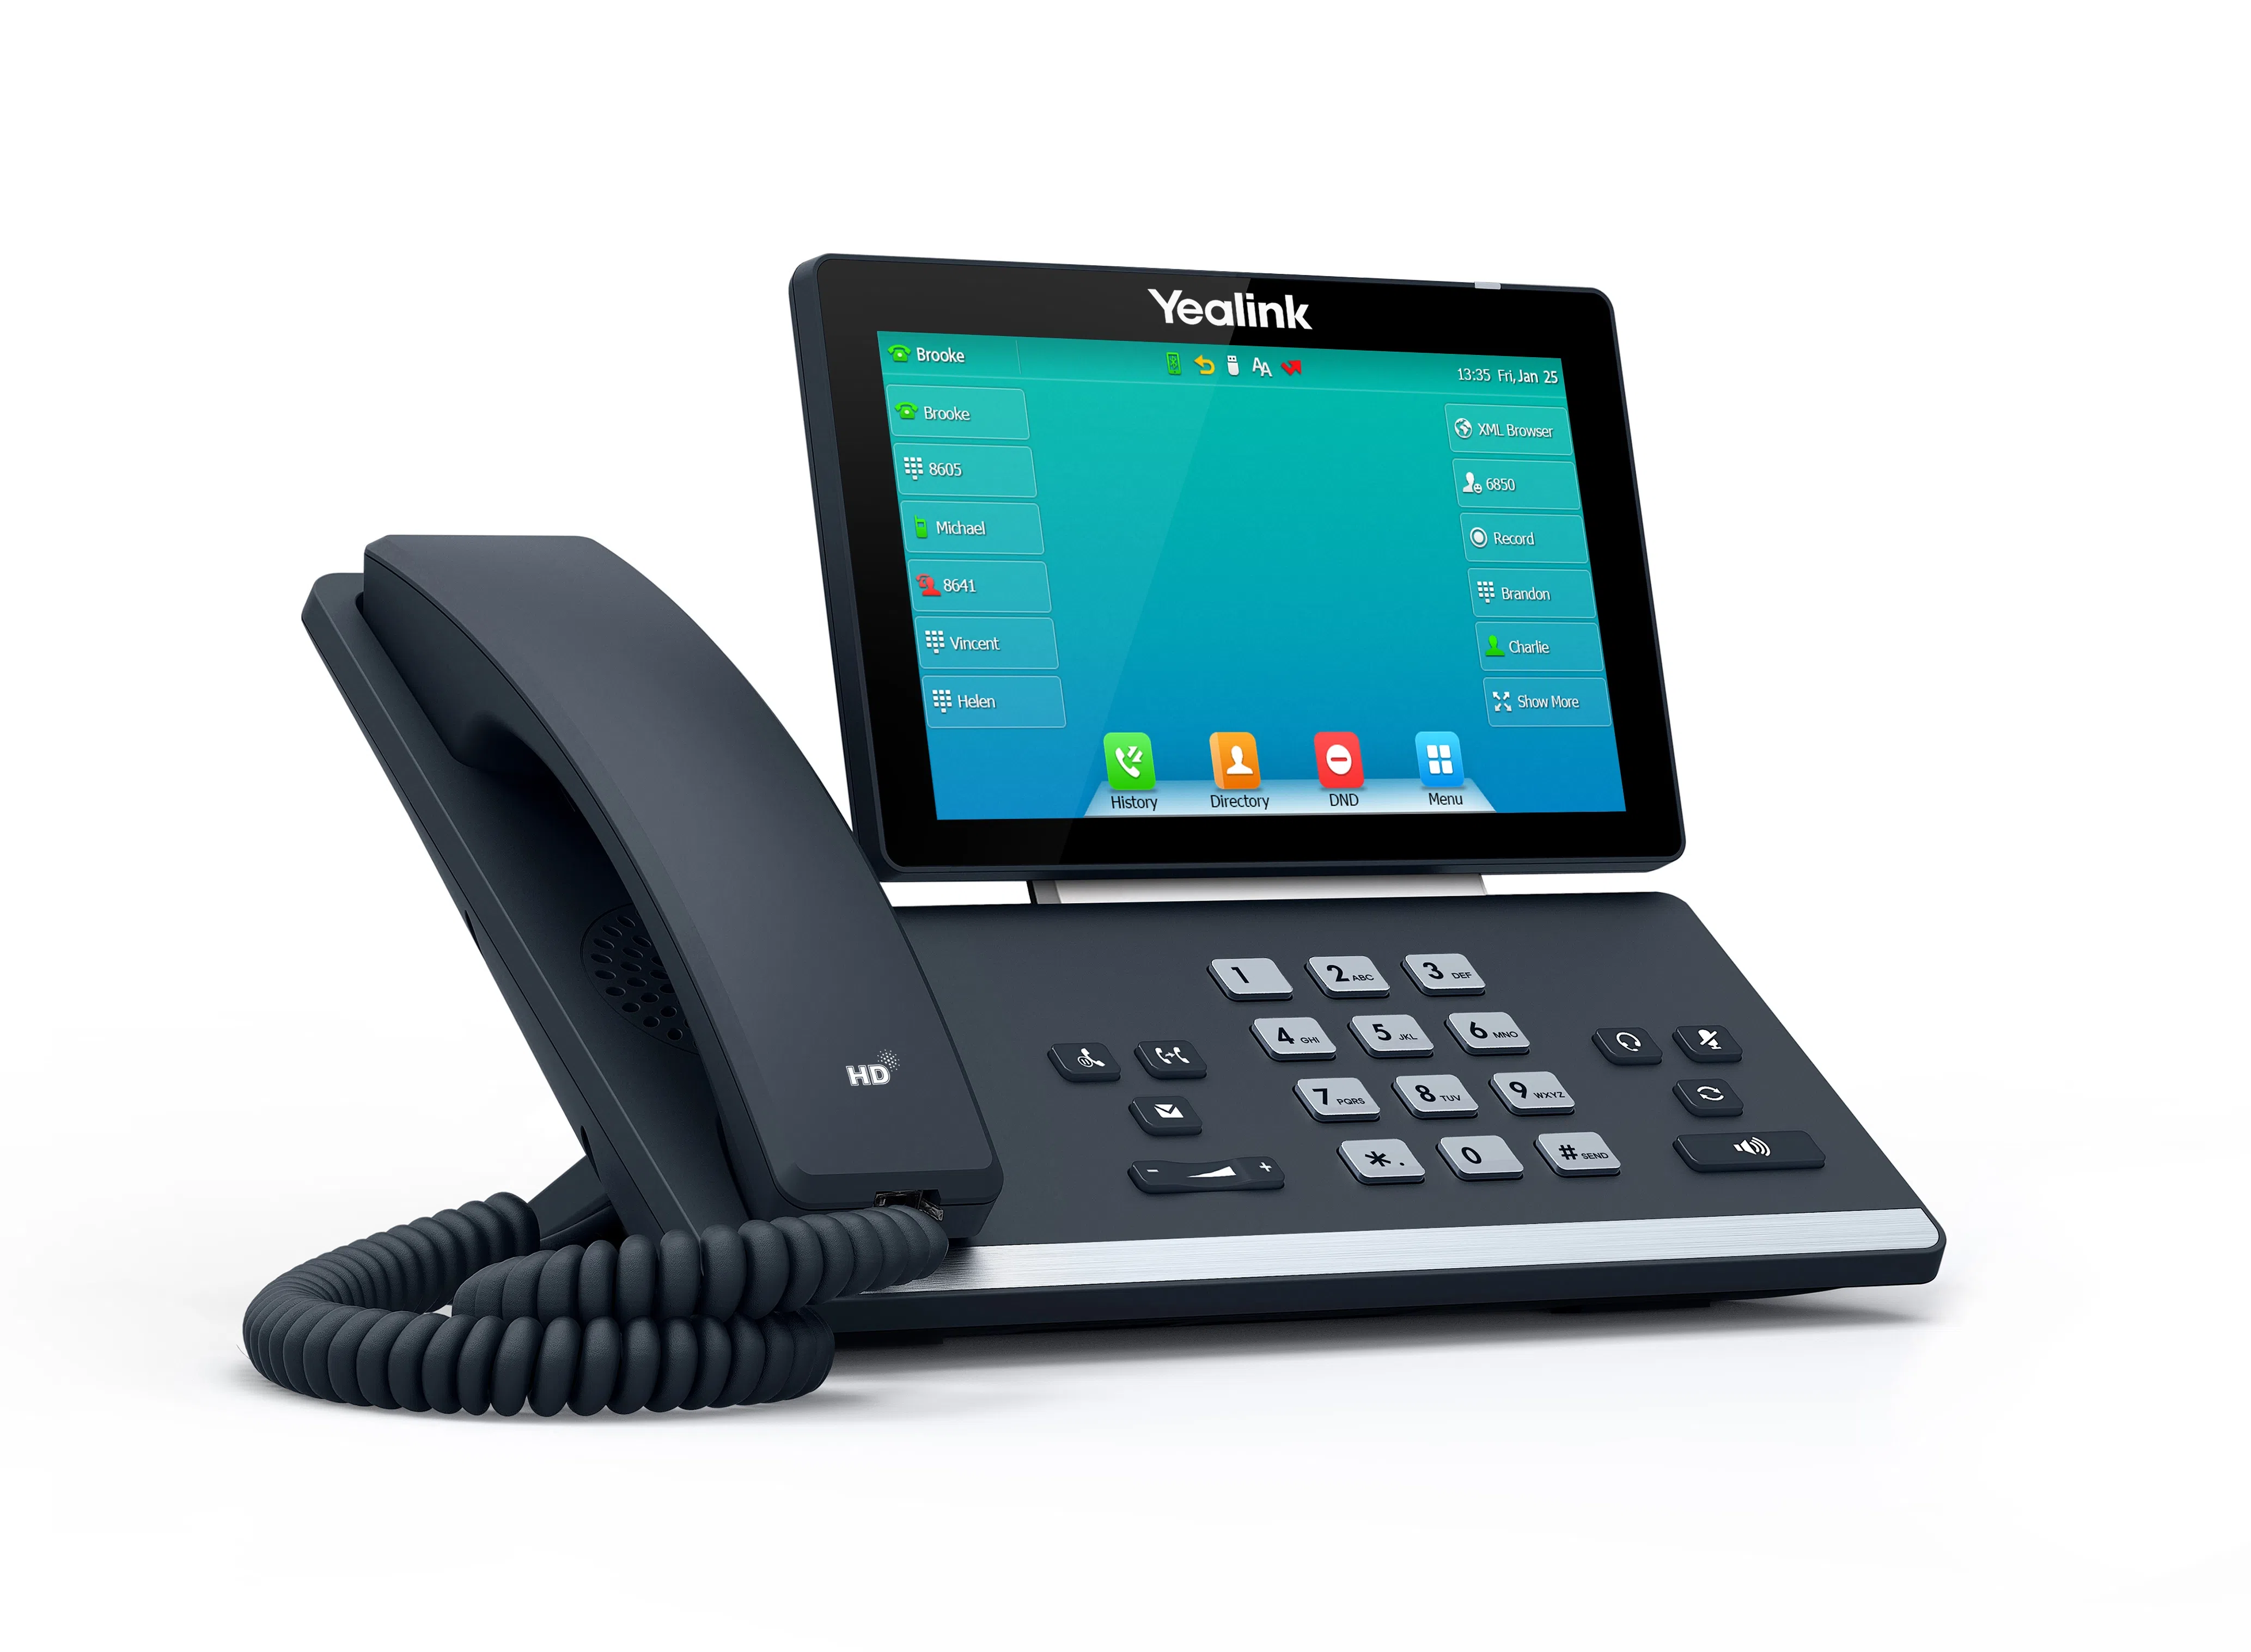 Yealink SIP-T57W Premium IP Phone with Built-In Bluetooth and Wi-Fi 1301089 Questions & Answers